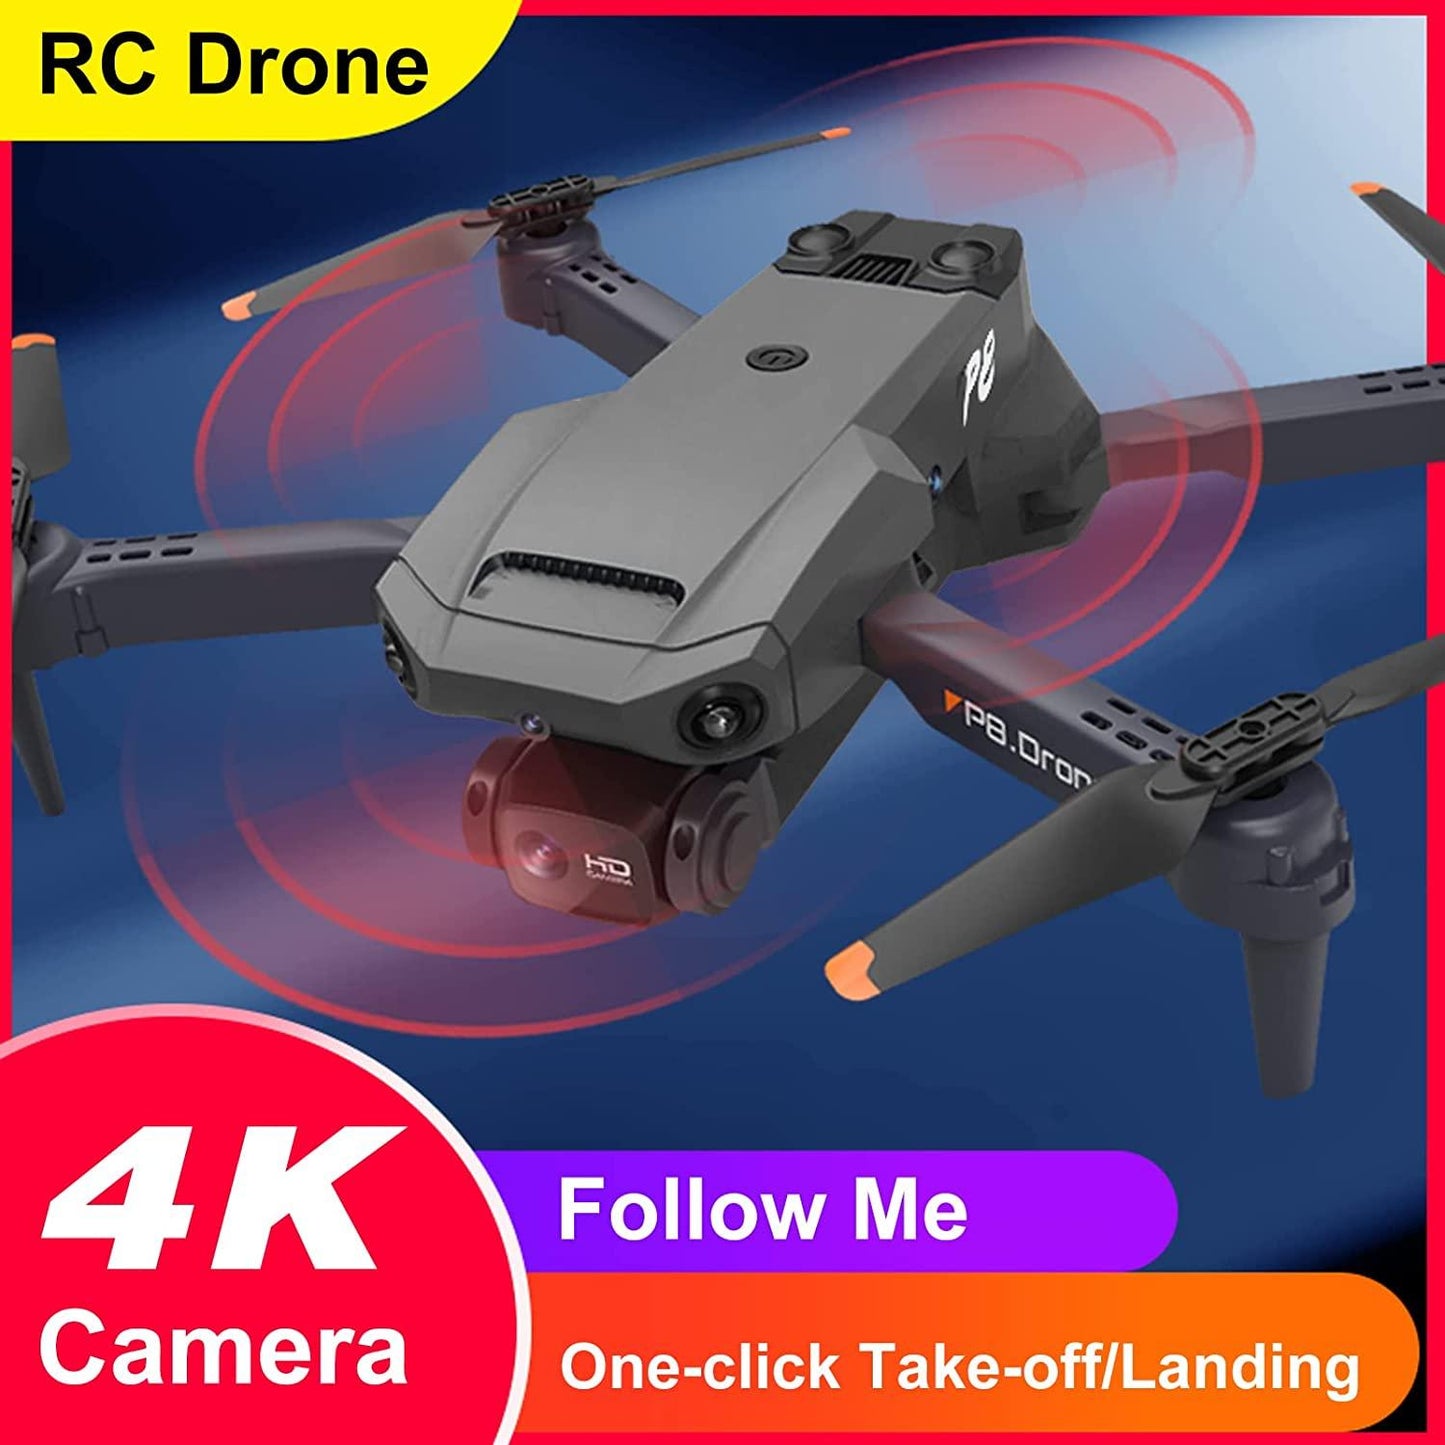 GoolRC Drone with Camera for Beginner - 4K Dual Camera RC Quadcopter with Function 4 Sided Obstacle Avoidance Waypoint Flight Gesture Control Storage Bag Package Drones for Kids 2 Battery - RCDrone